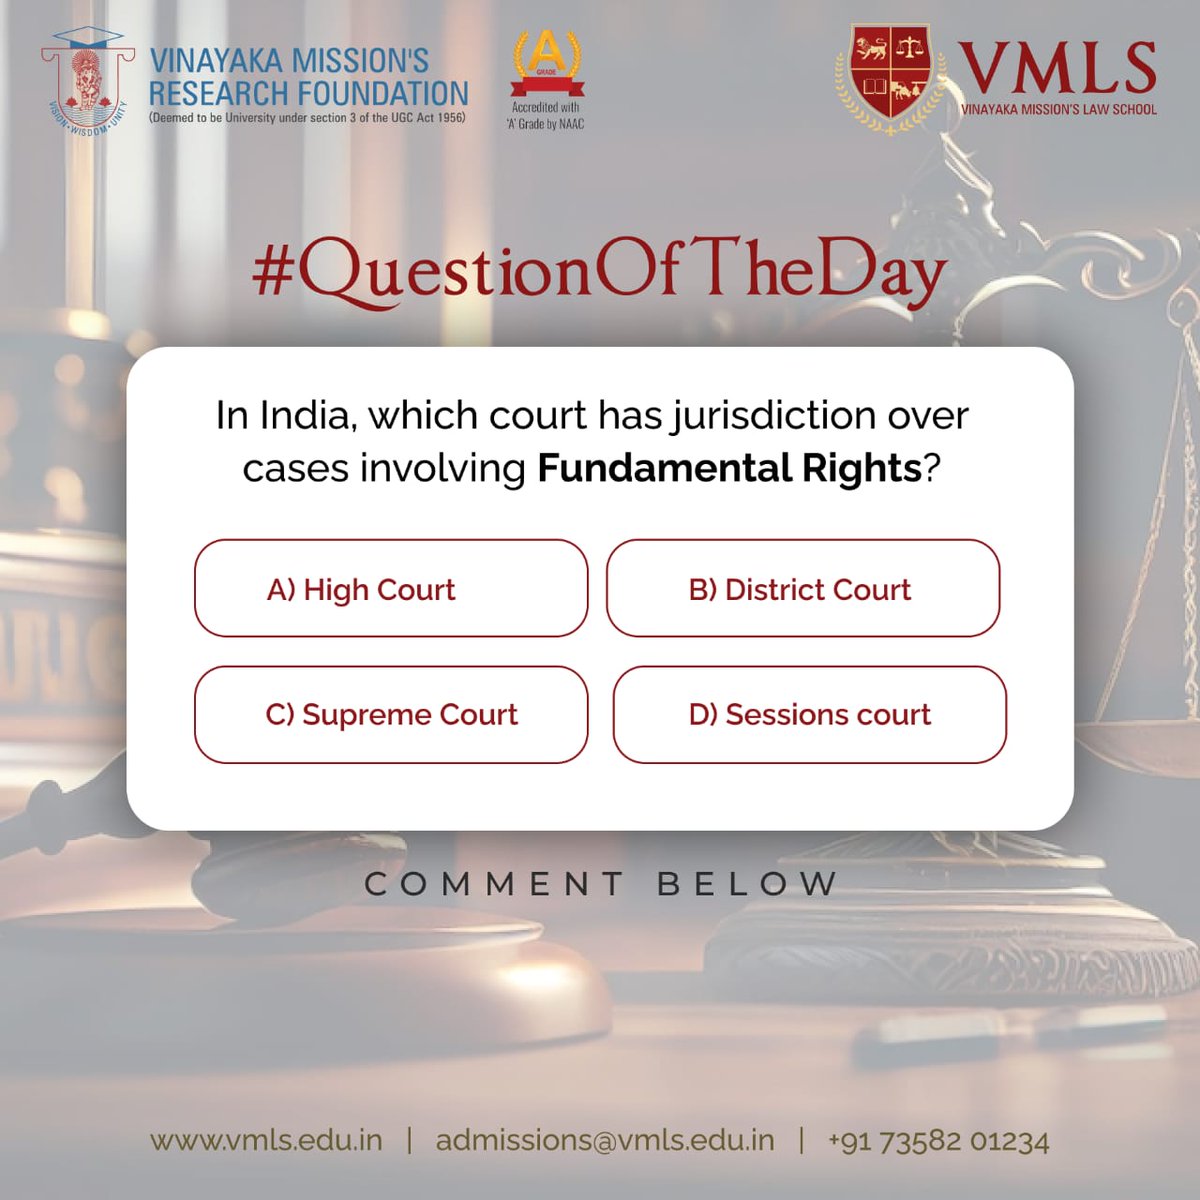 In India, which court has jurisdiction over cases involving fundamental rights?

#QOTD #QuestionOfTheDay #DailyQuestion #InquiryInsights #curiositycornerrep
#AskTheAudience #ThoughtfulQueries #MindfulInterrogations #vmls